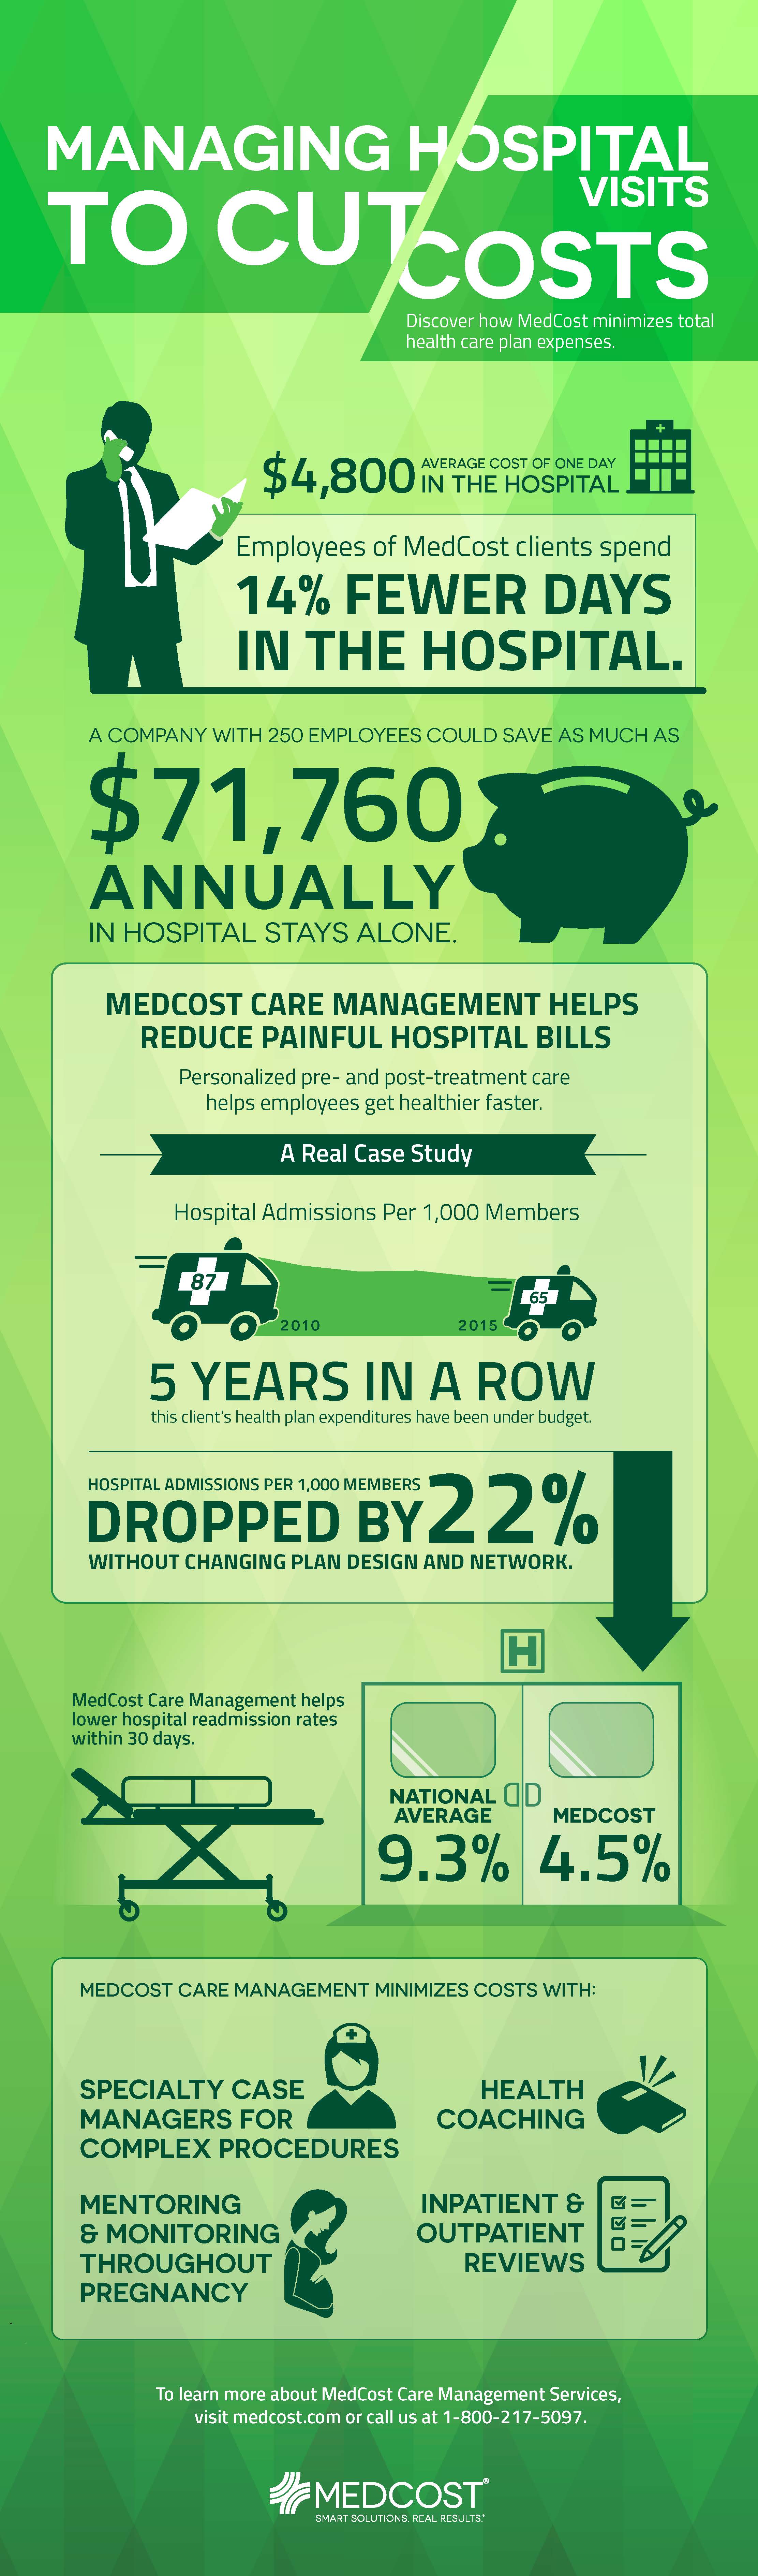 Managing Hospital Visits to Cut Costs (Infographic)